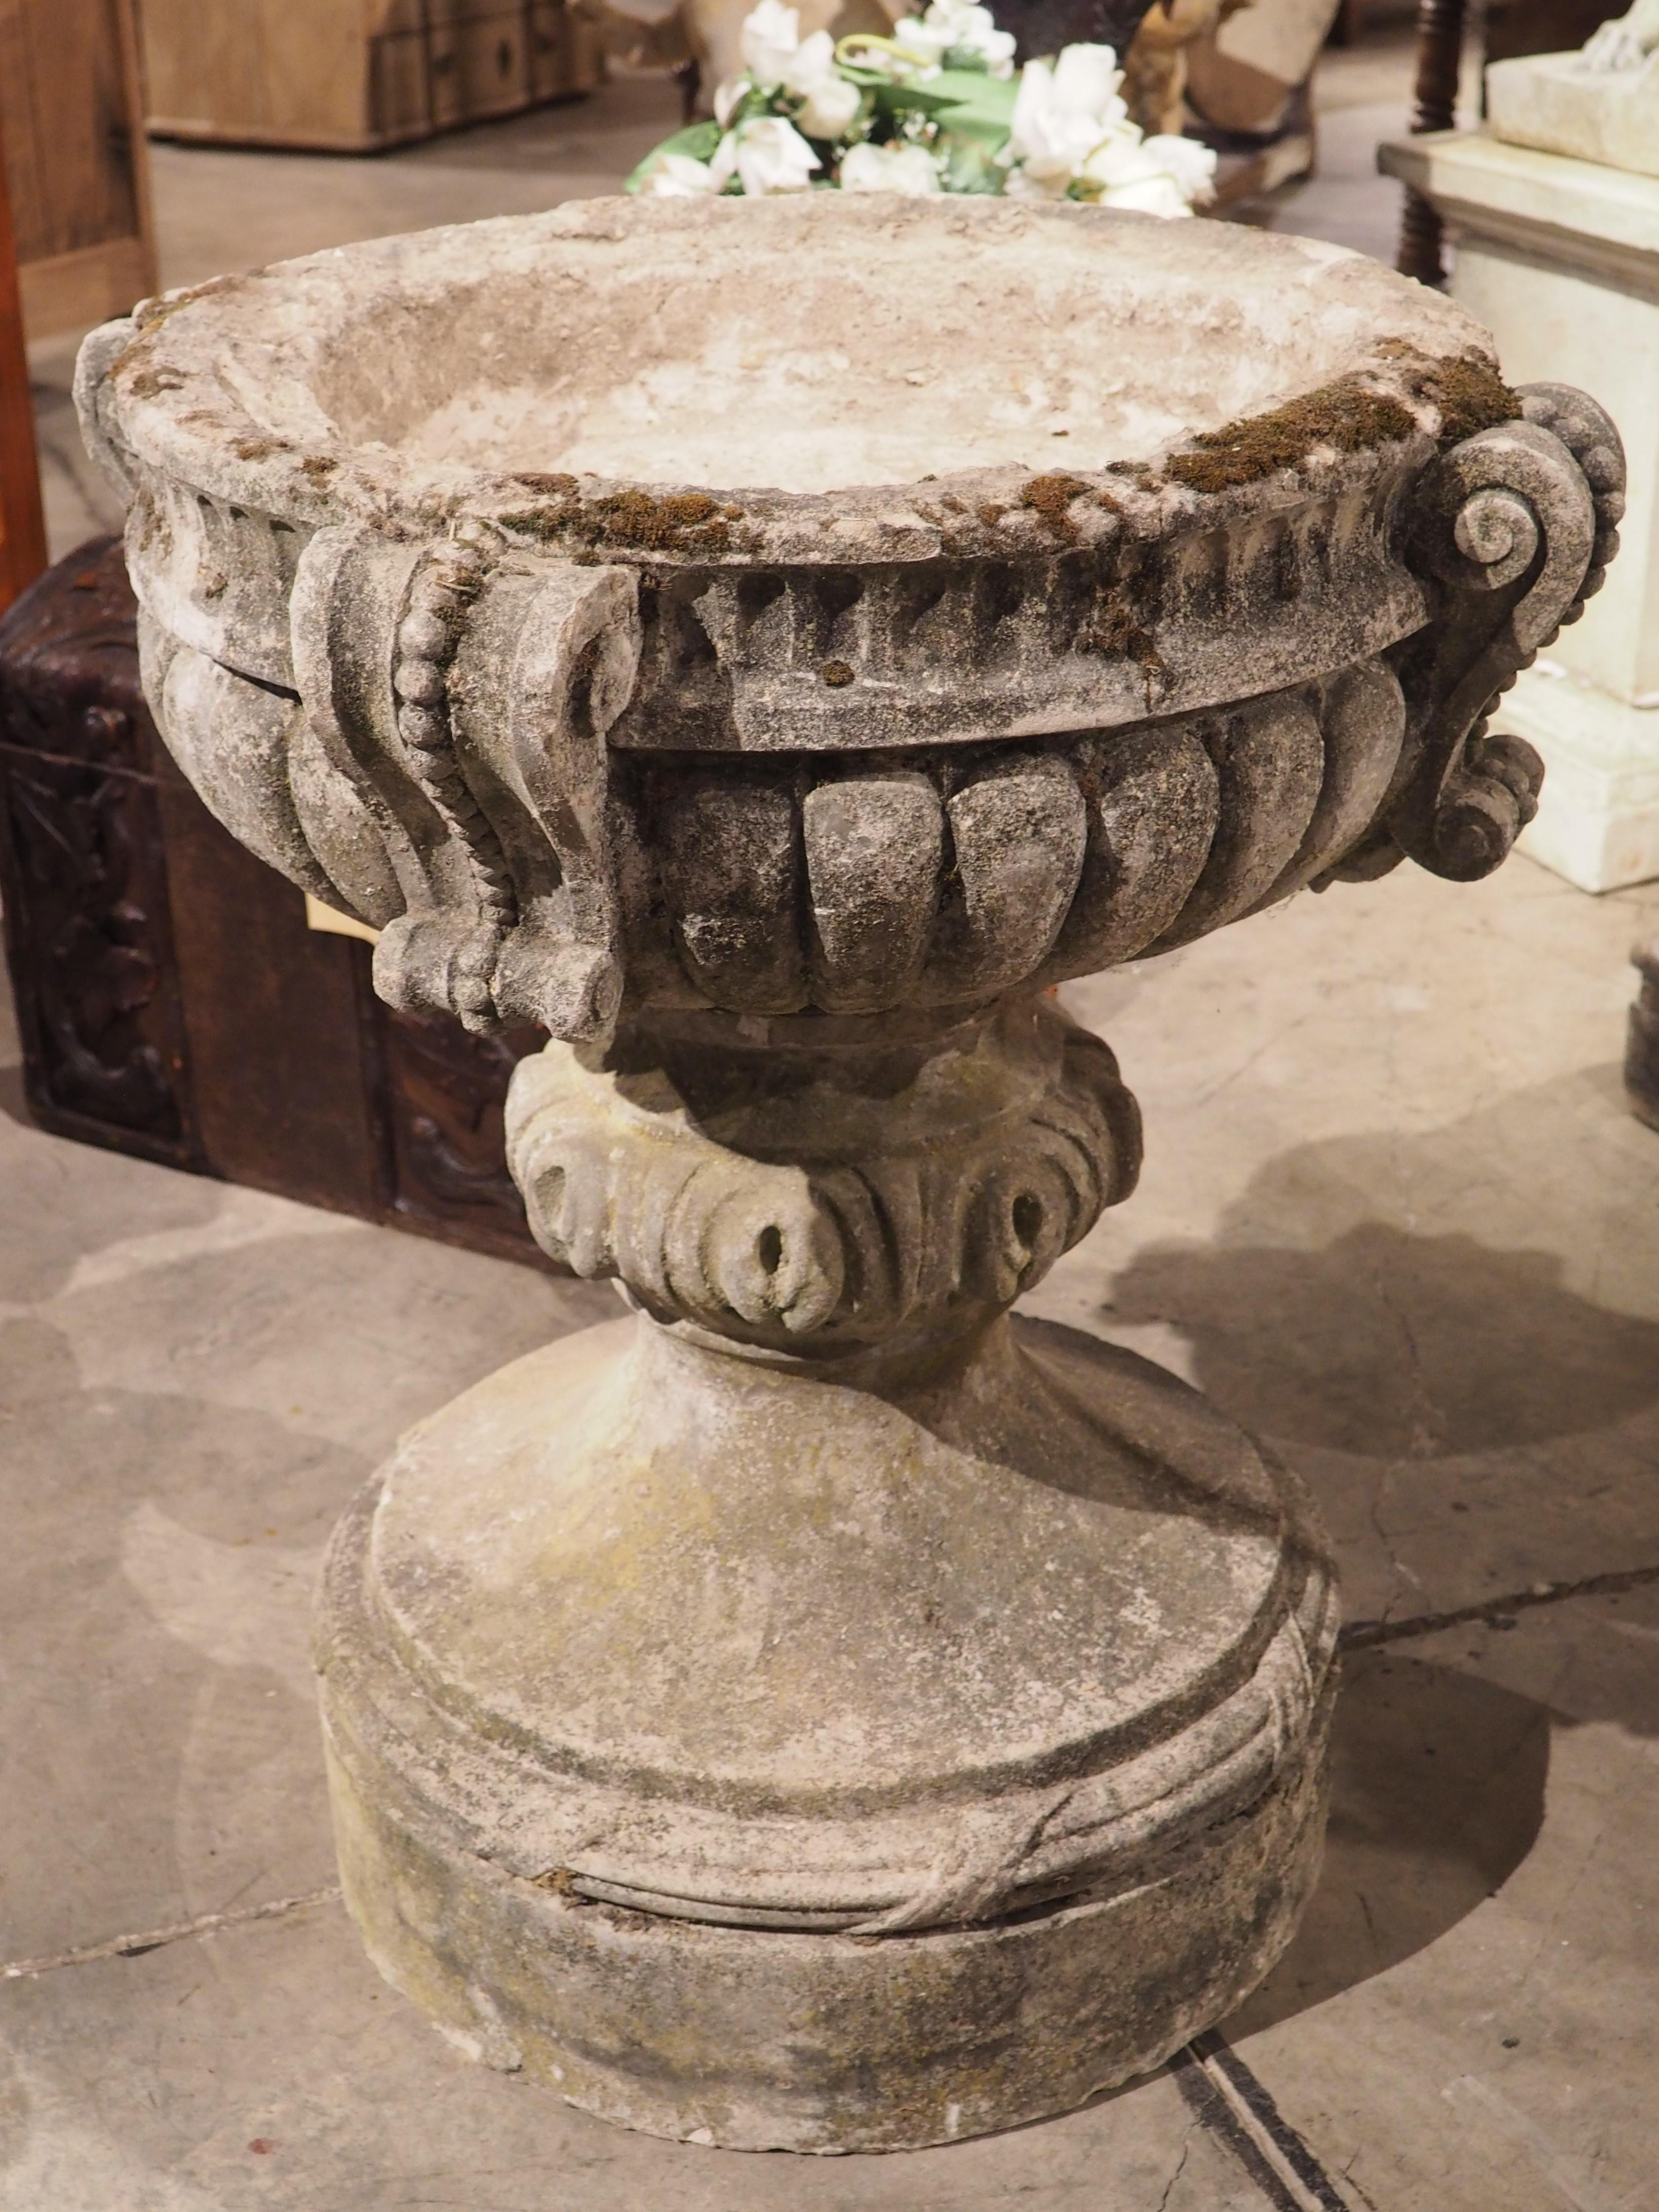 Originally a holy water stoup from a church in the Haute-Garonne department of France, this hand-carved stone benitier dates to the 1700’s. The Haute-Garonne is located in the southwestern part of France, along the Spanish border and about 150 km